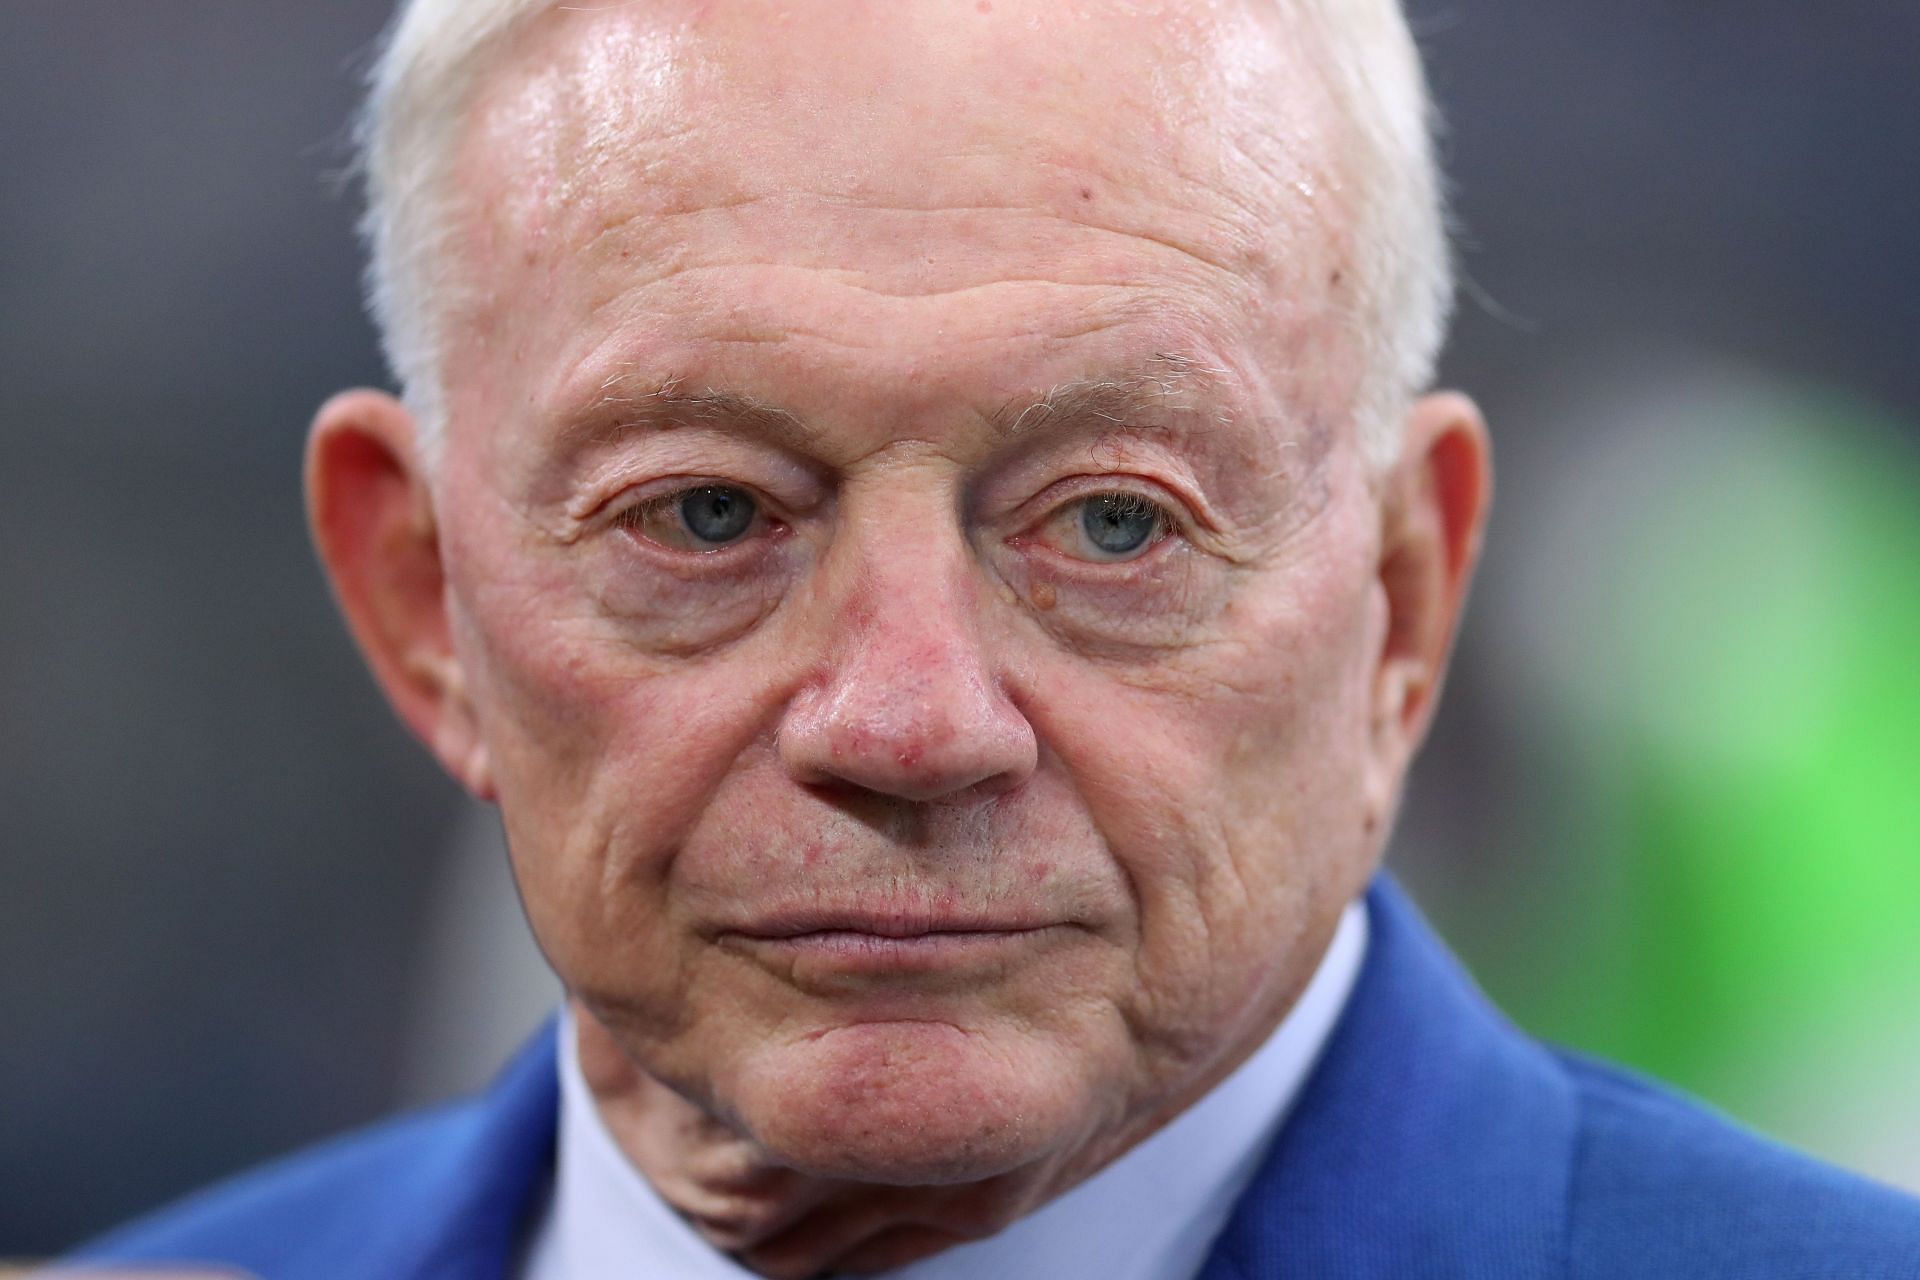 Dallas Cowboys owner Jerry Jones looks on as his team take on the New York Giants